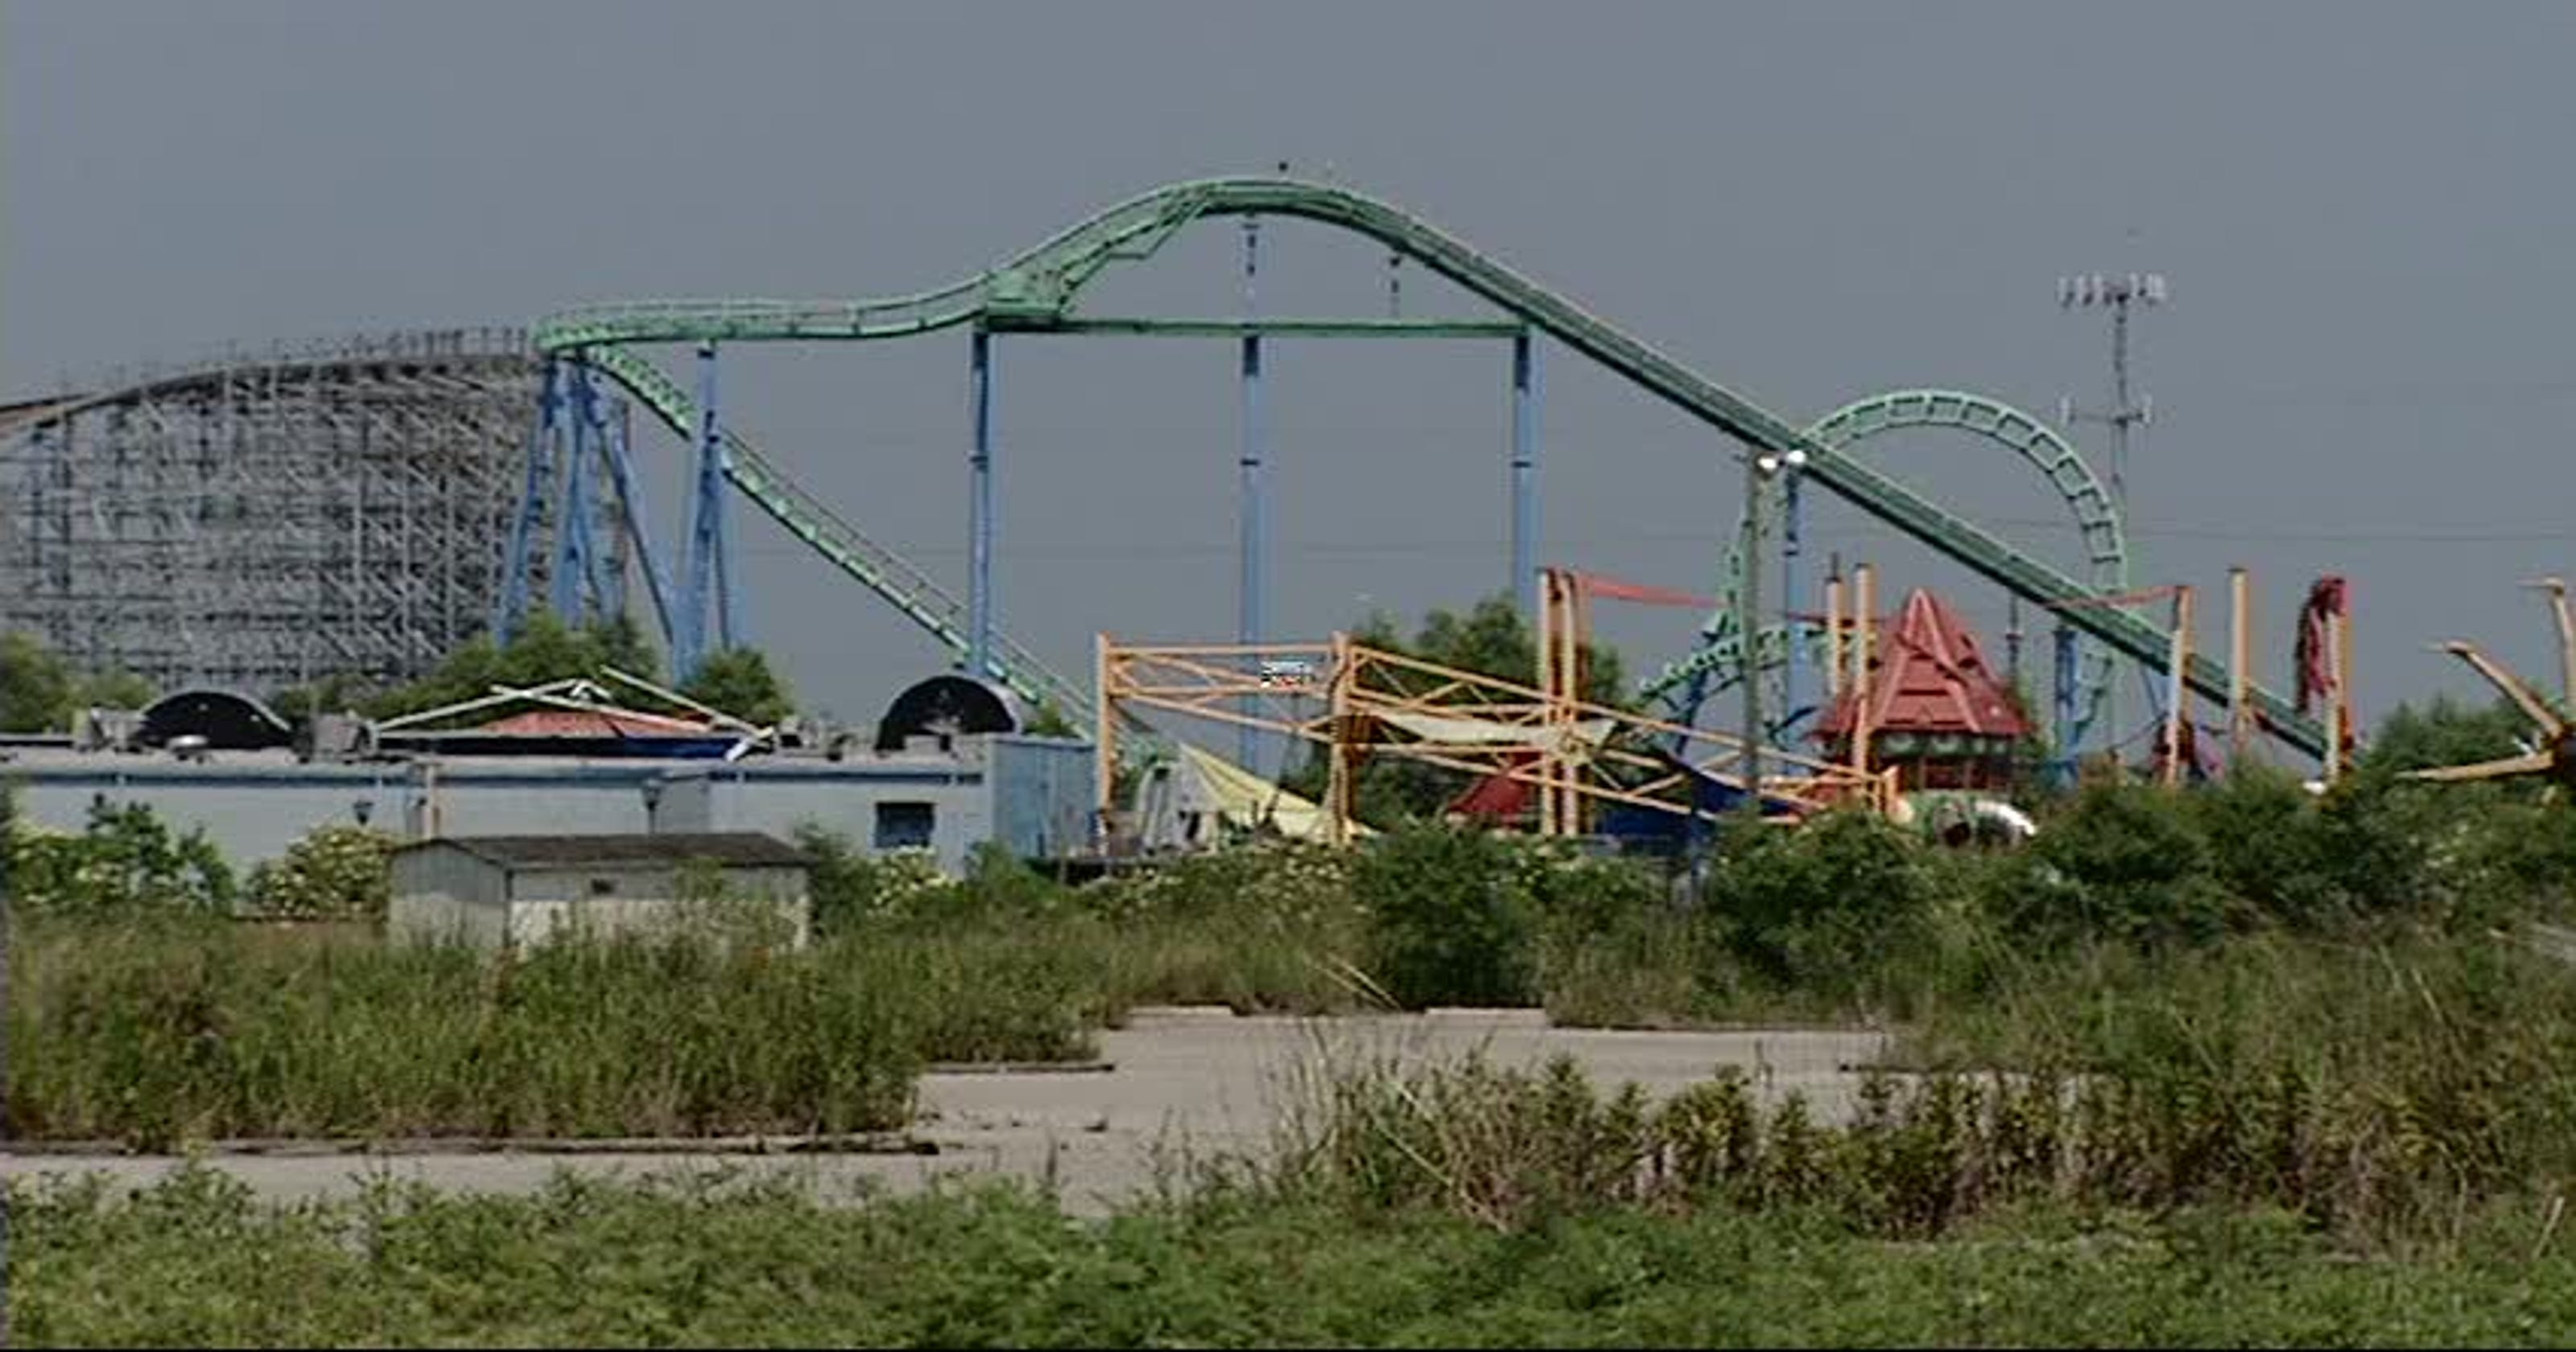 Six Flags New Orleans may come down soon